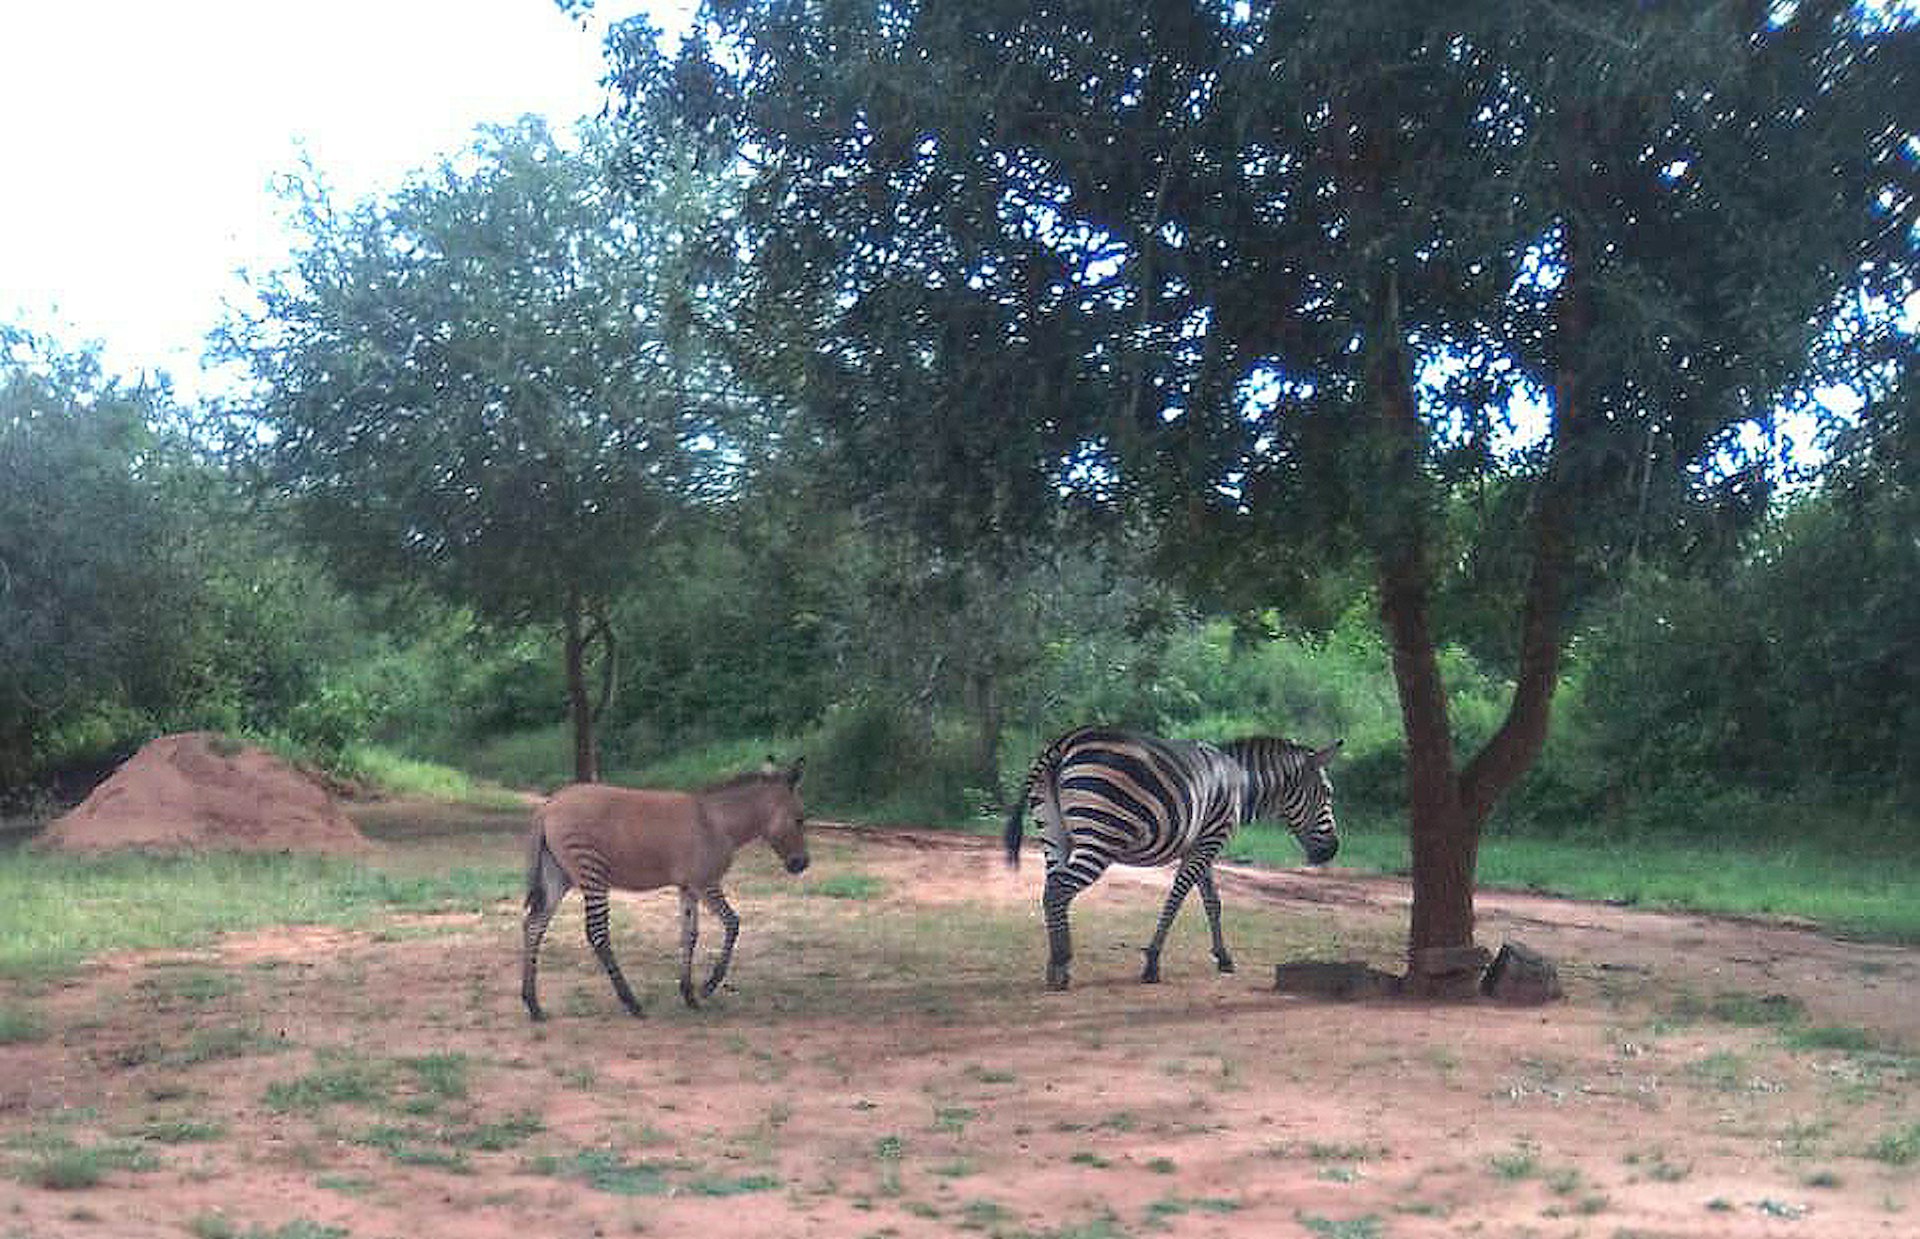 Mother zebra with a zonkey foal by her side